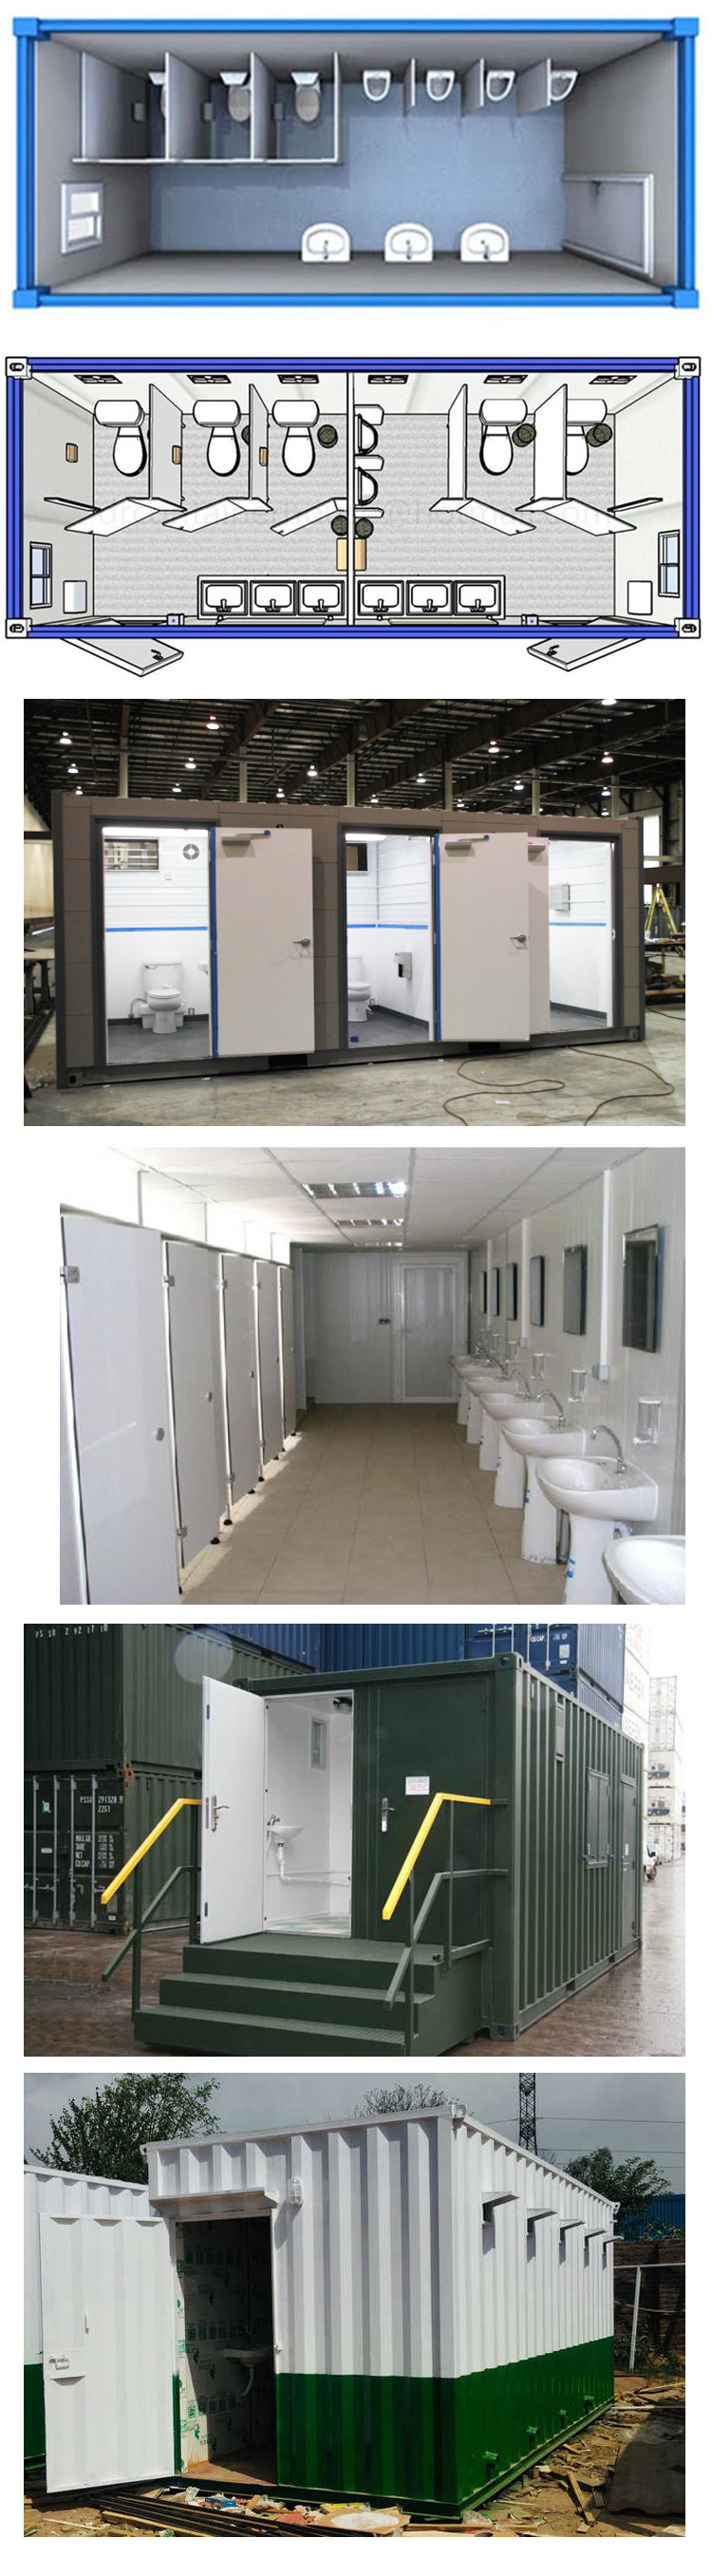 Philippines Standard Customized Mobile Modular Public Toilet Made in China